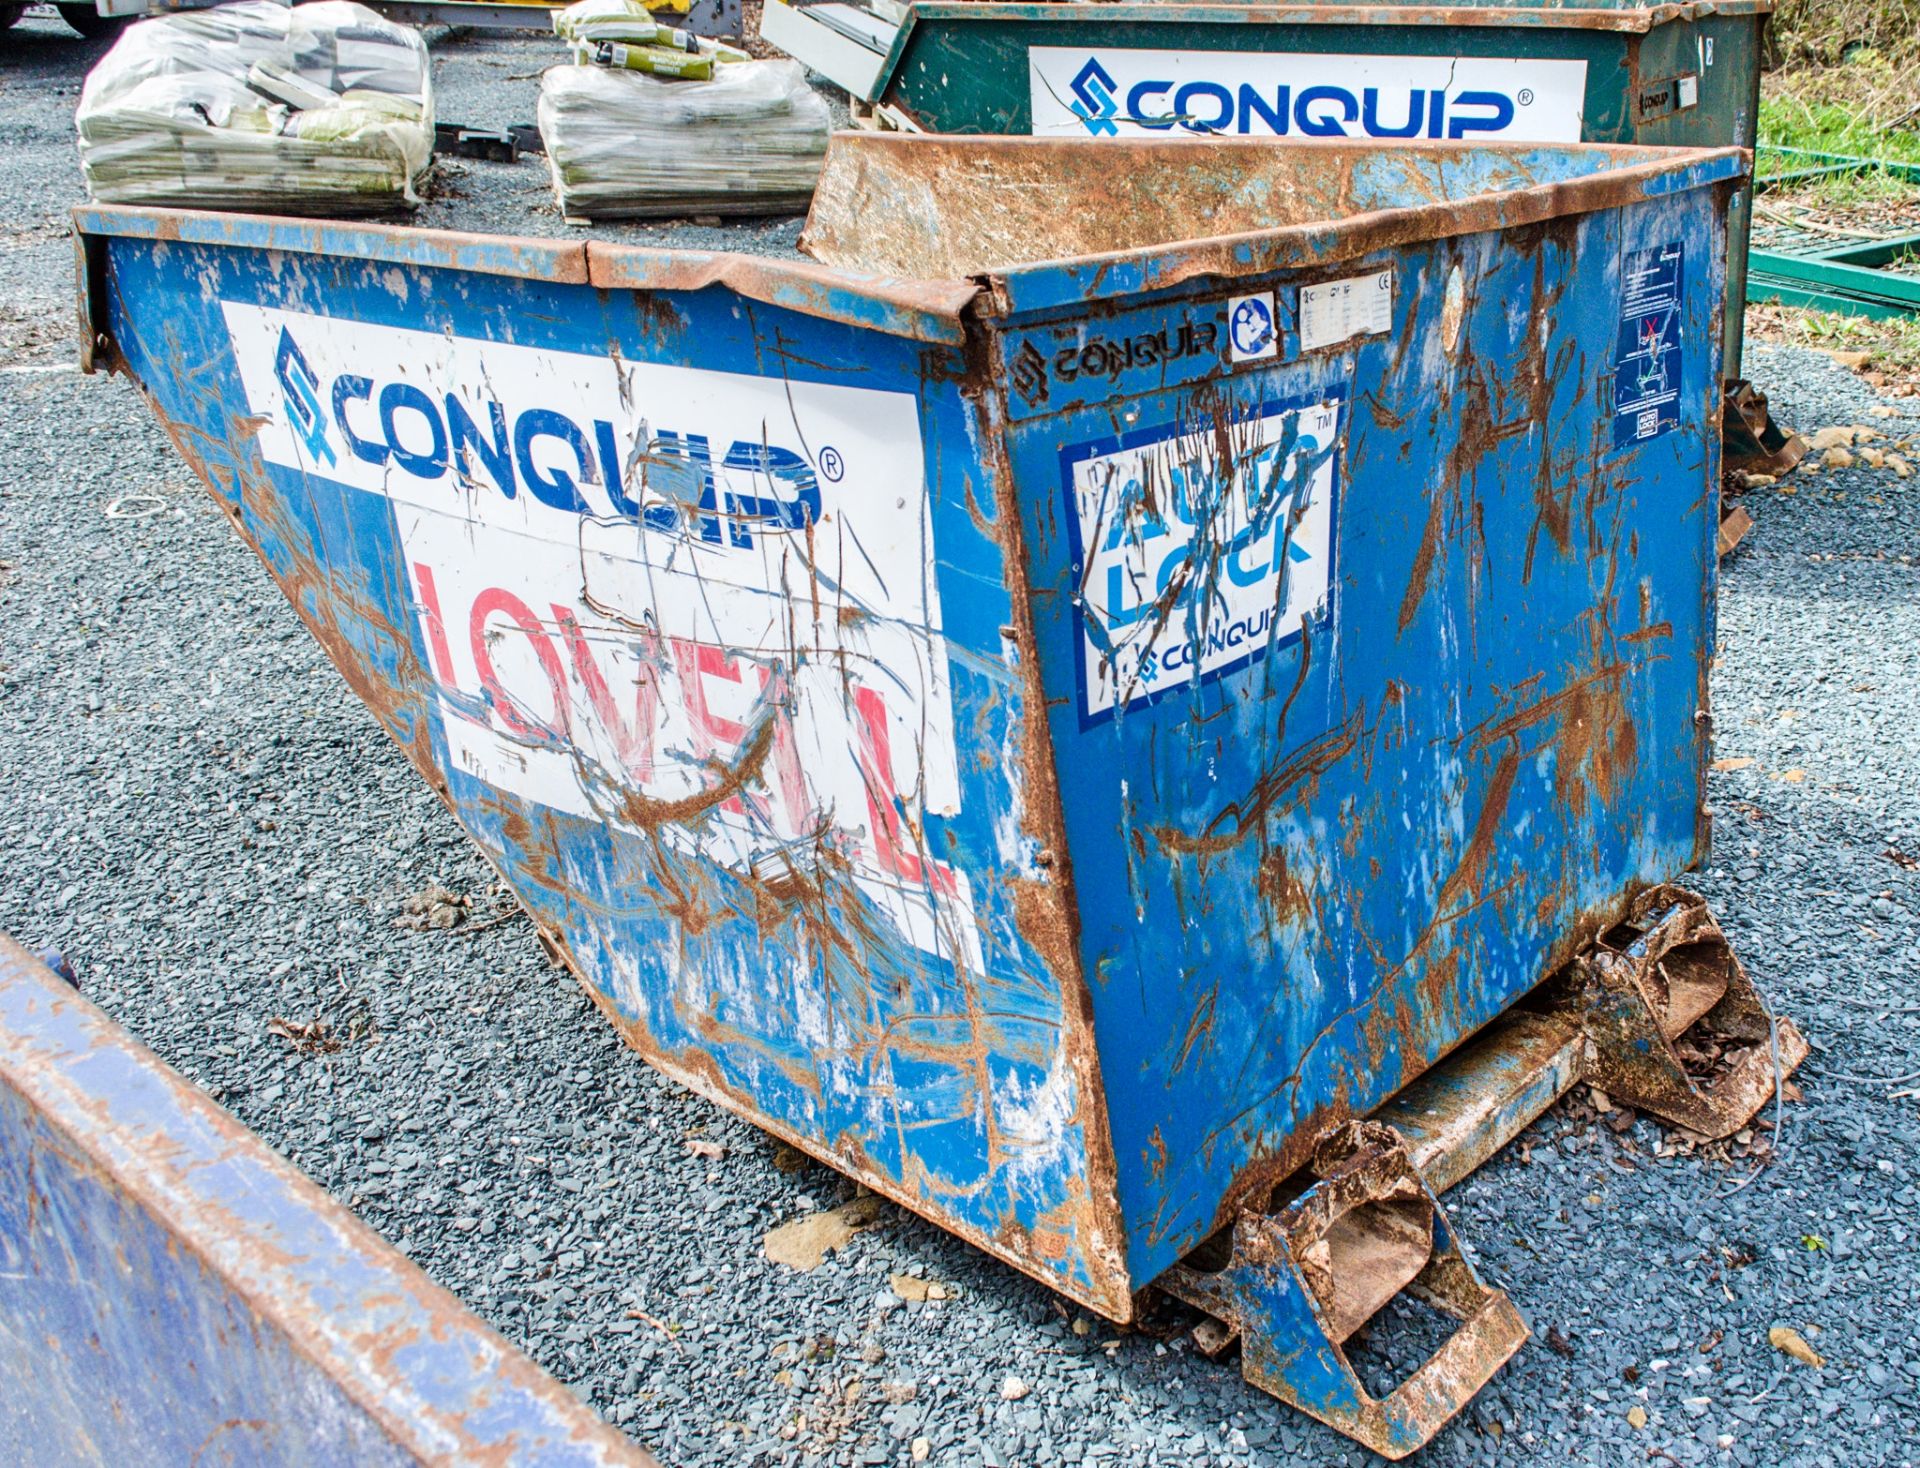 Conquip autolock steel fork lift tipping skip - Image 2 of 2